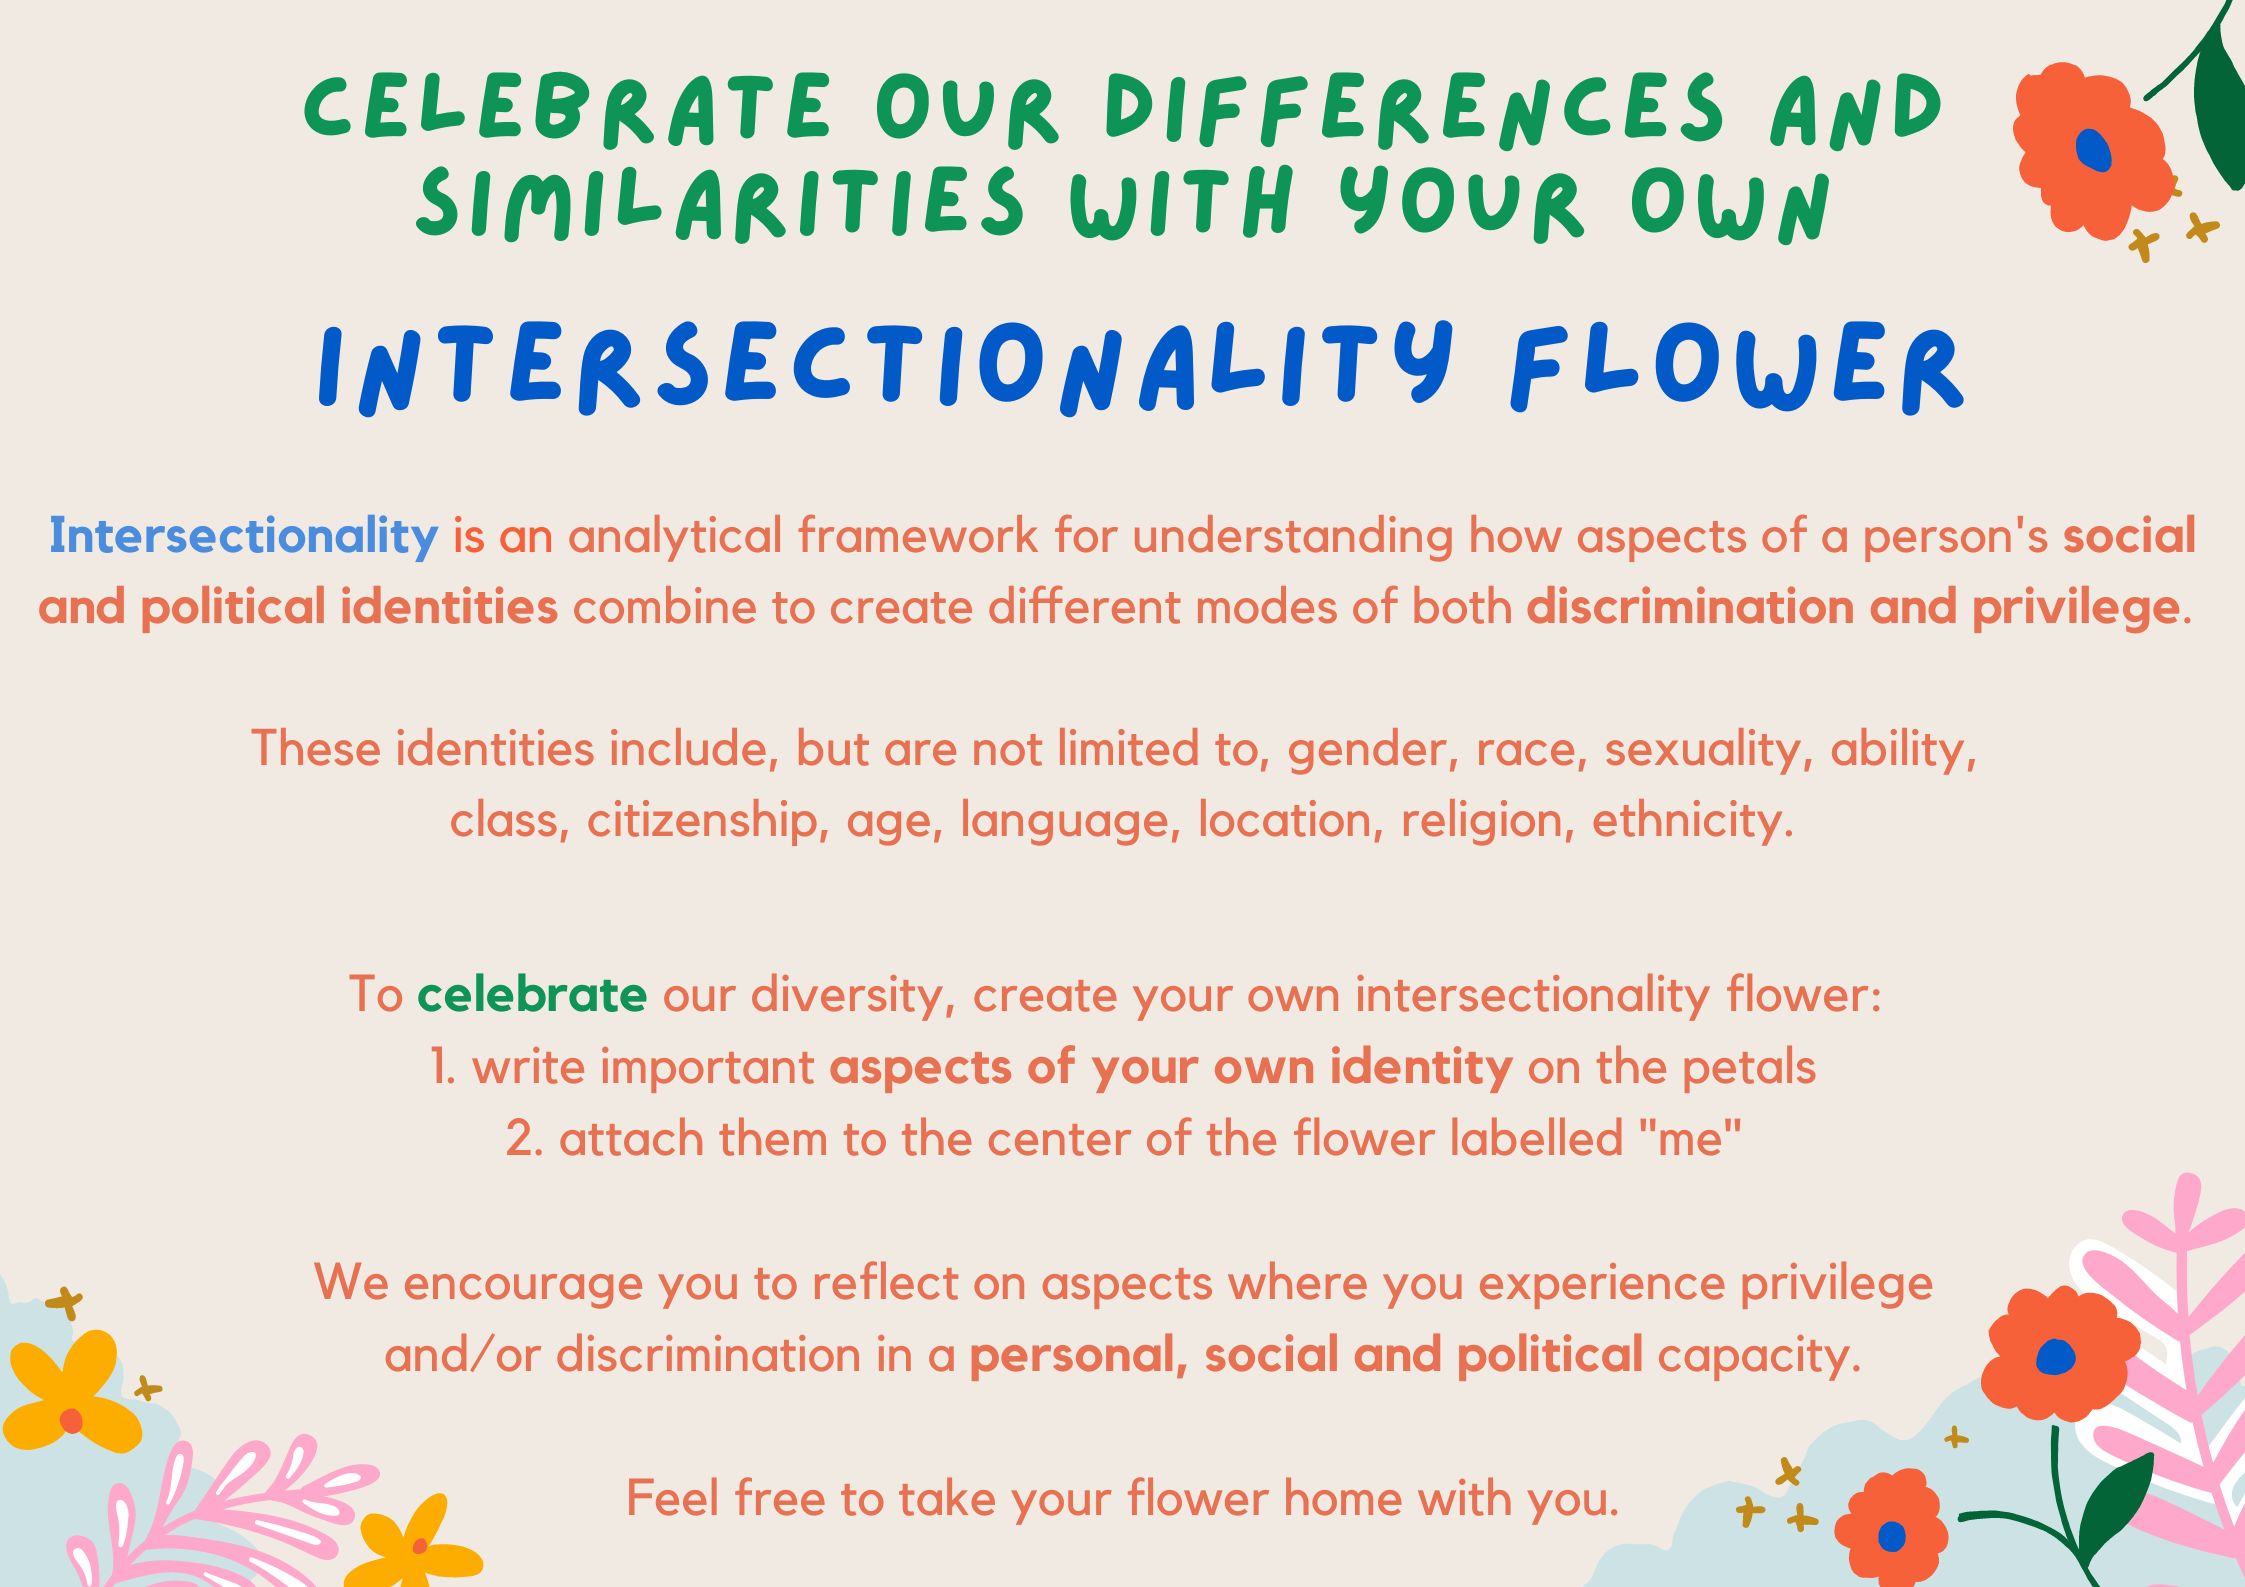 Title: Celebrate our differences and similarities with your own Intersectionality flower. Centre: Intersectionality is an analytical framework for understanding how aspects of a person's social and political identities combine to create different modes of